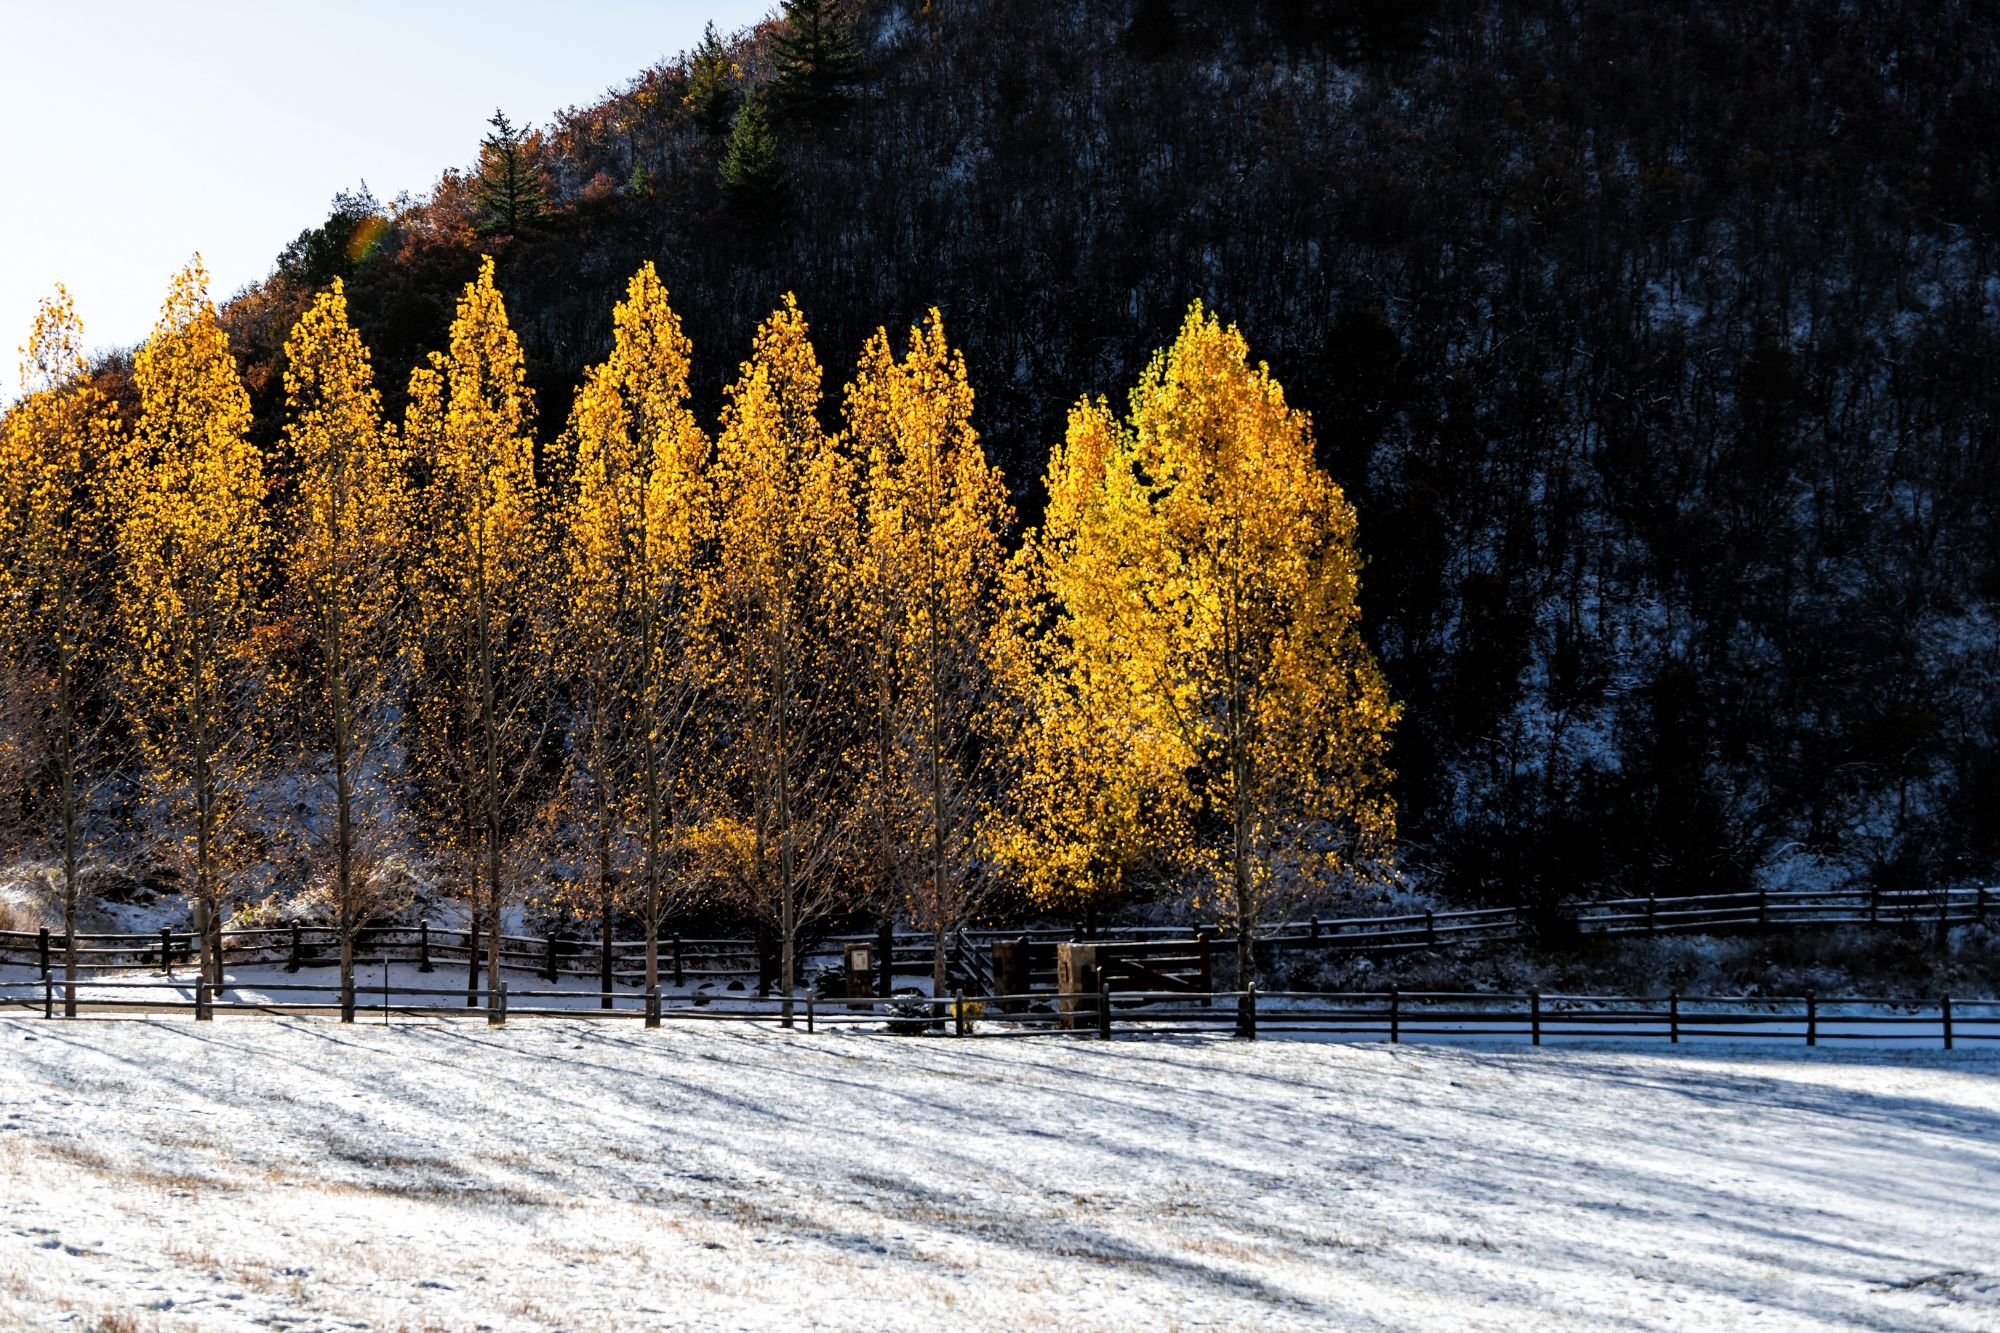 A view of tall and straight yellow-leaved trees with a dusting of snow in the foreground. 